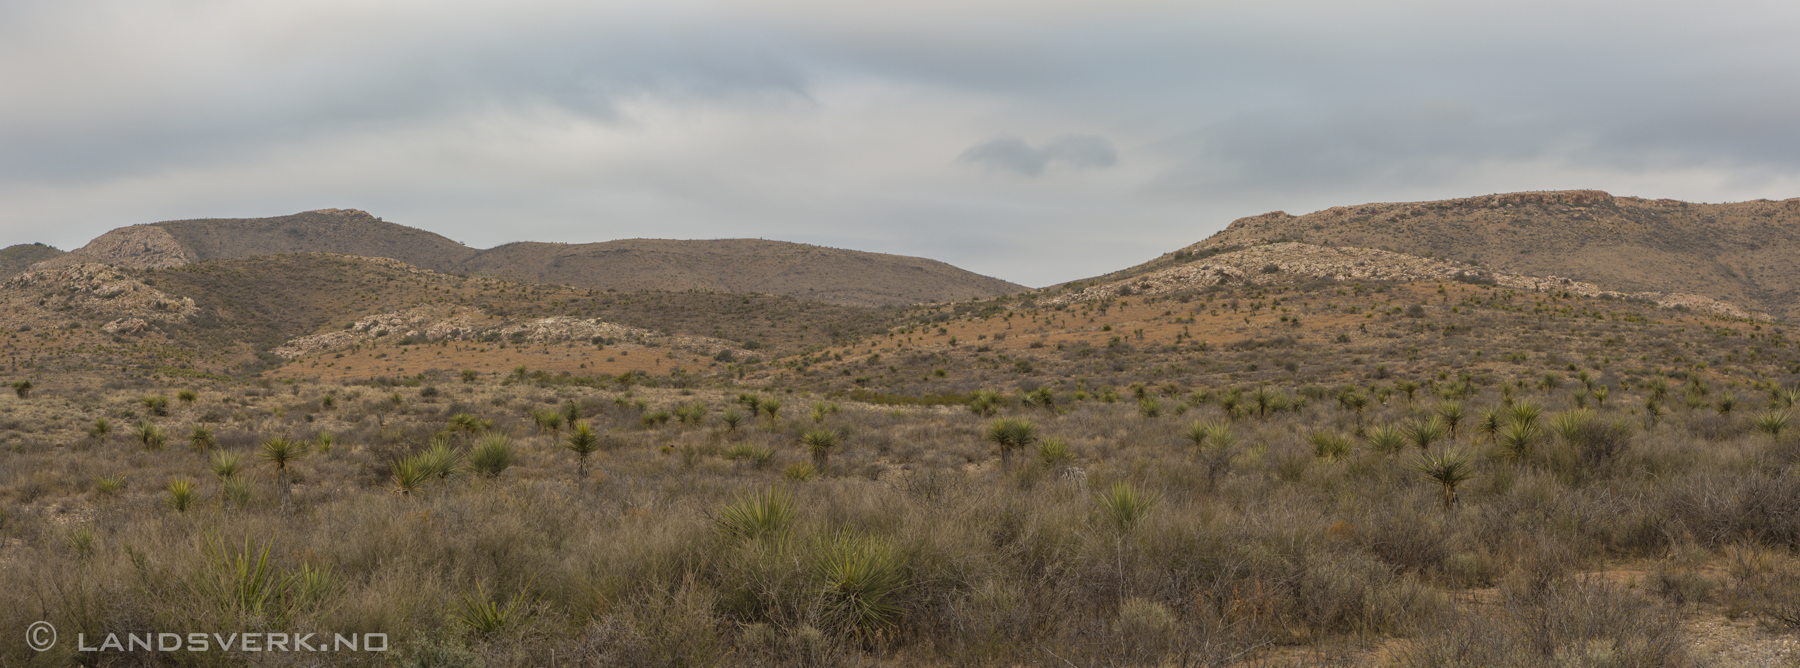 Somewhere in West Texas. 

(Canon EOS 5D Mark III / Canon EF 24-70mm f/2.8 L USM